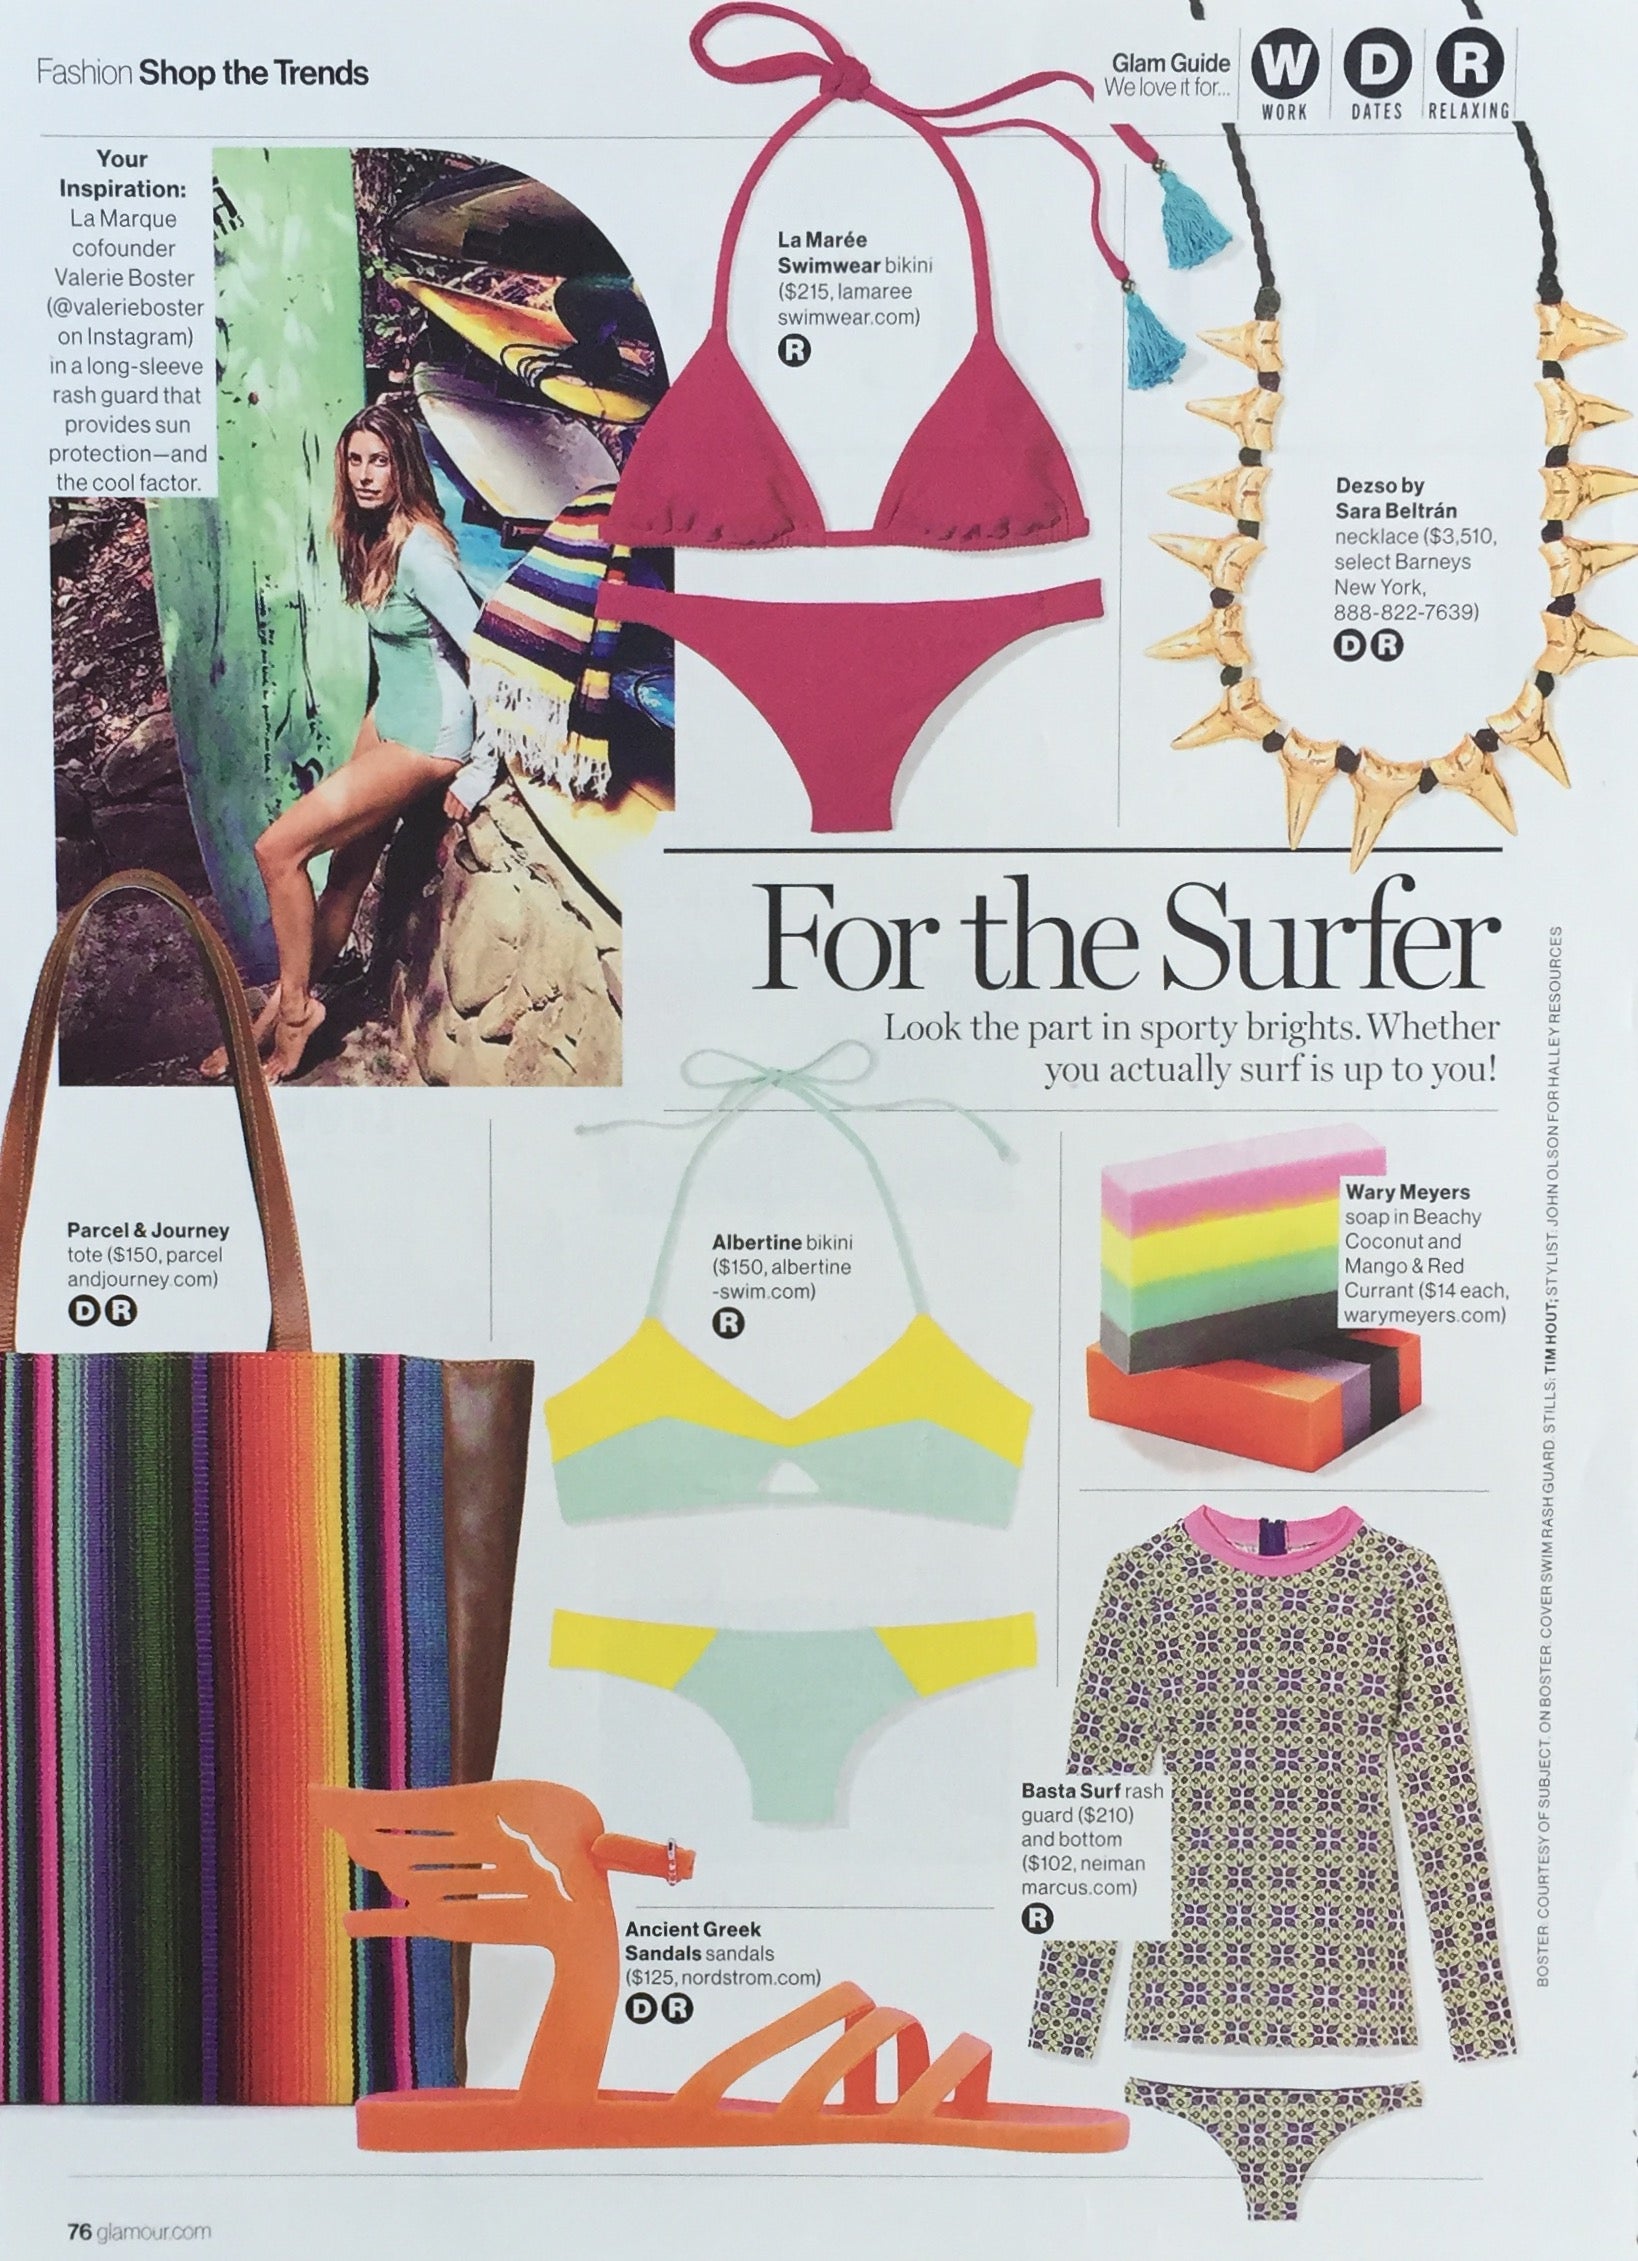 Press | View Cover Swim Features in Magazines, Websites and on Television